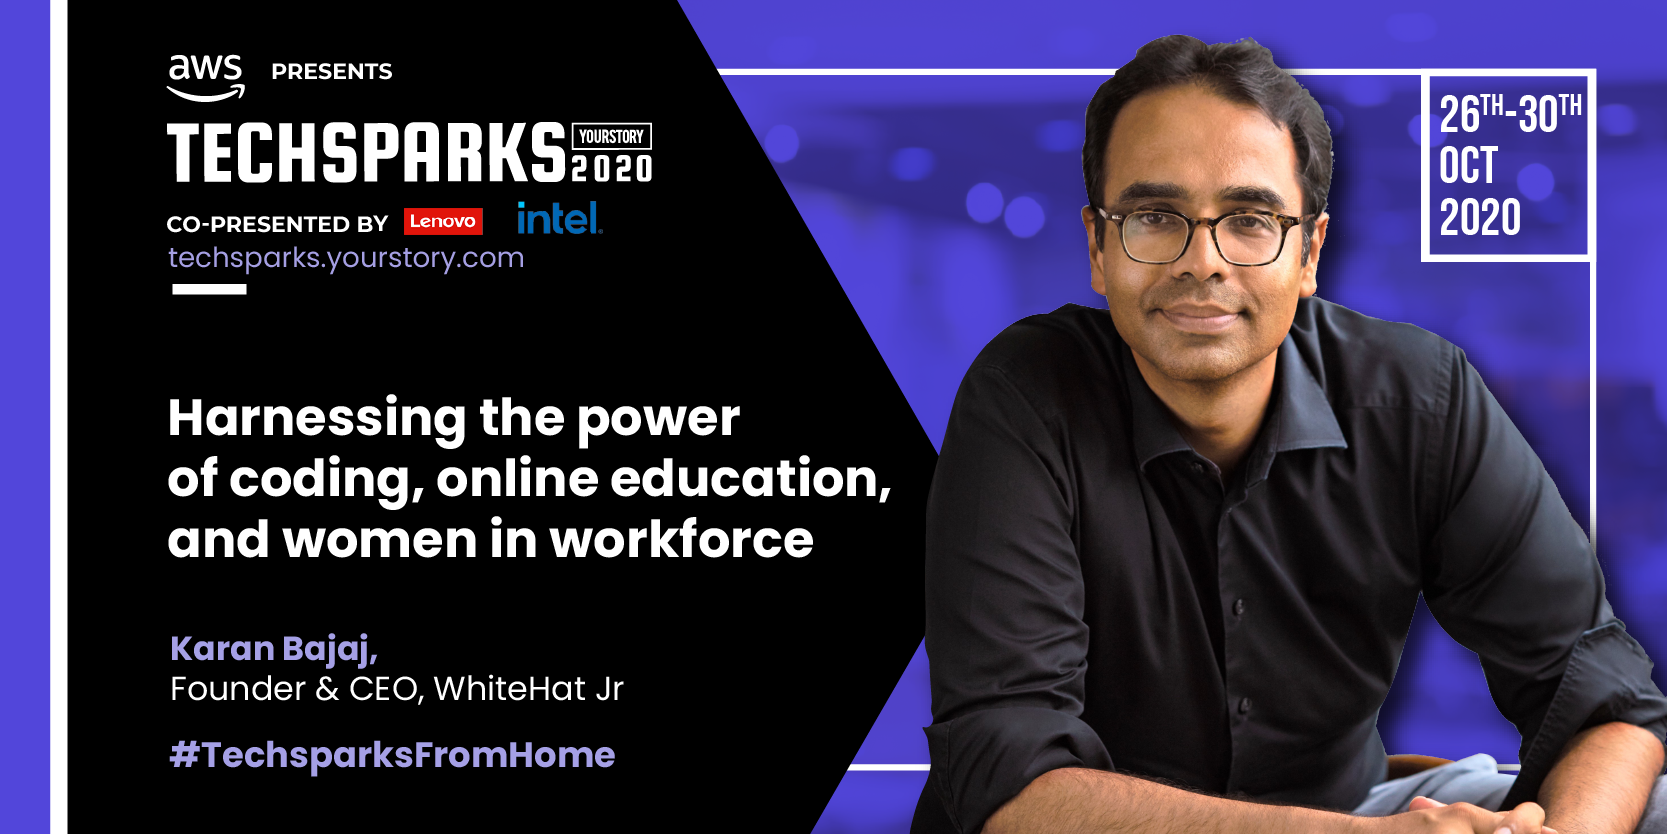 [TechSparks 2020] Who is behind the success of WhiteHat Jr? CEO Karan Bajaj credits leveraging women’s talent pool in India
